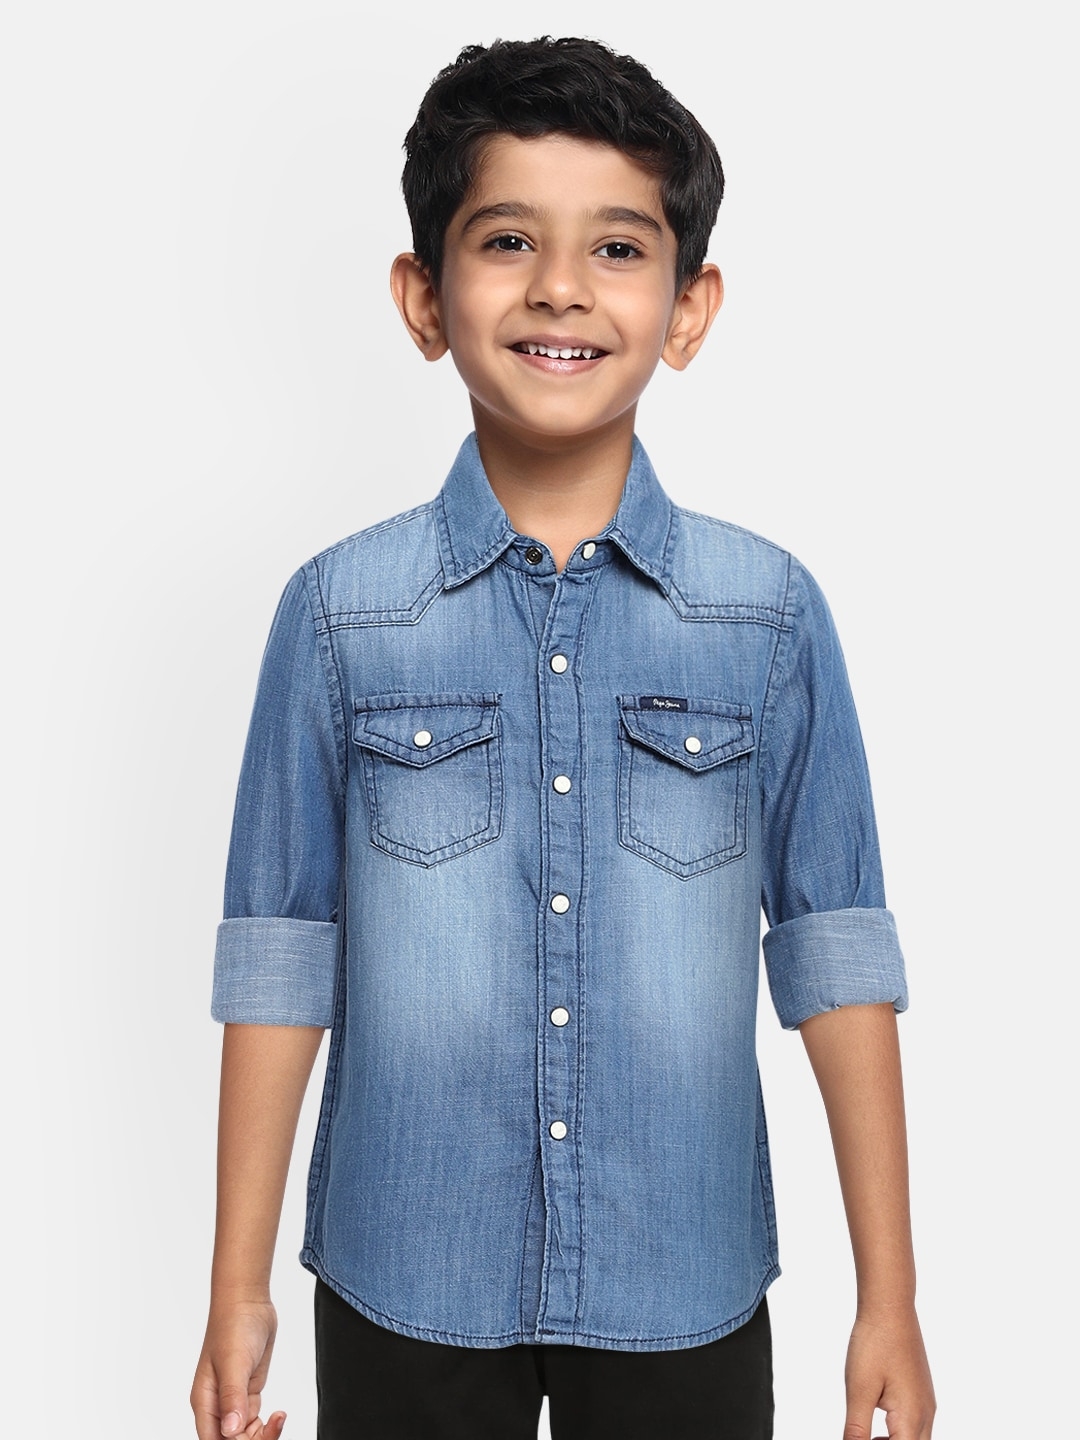 Pepe Jeans | Blue Solid Casual Shirt